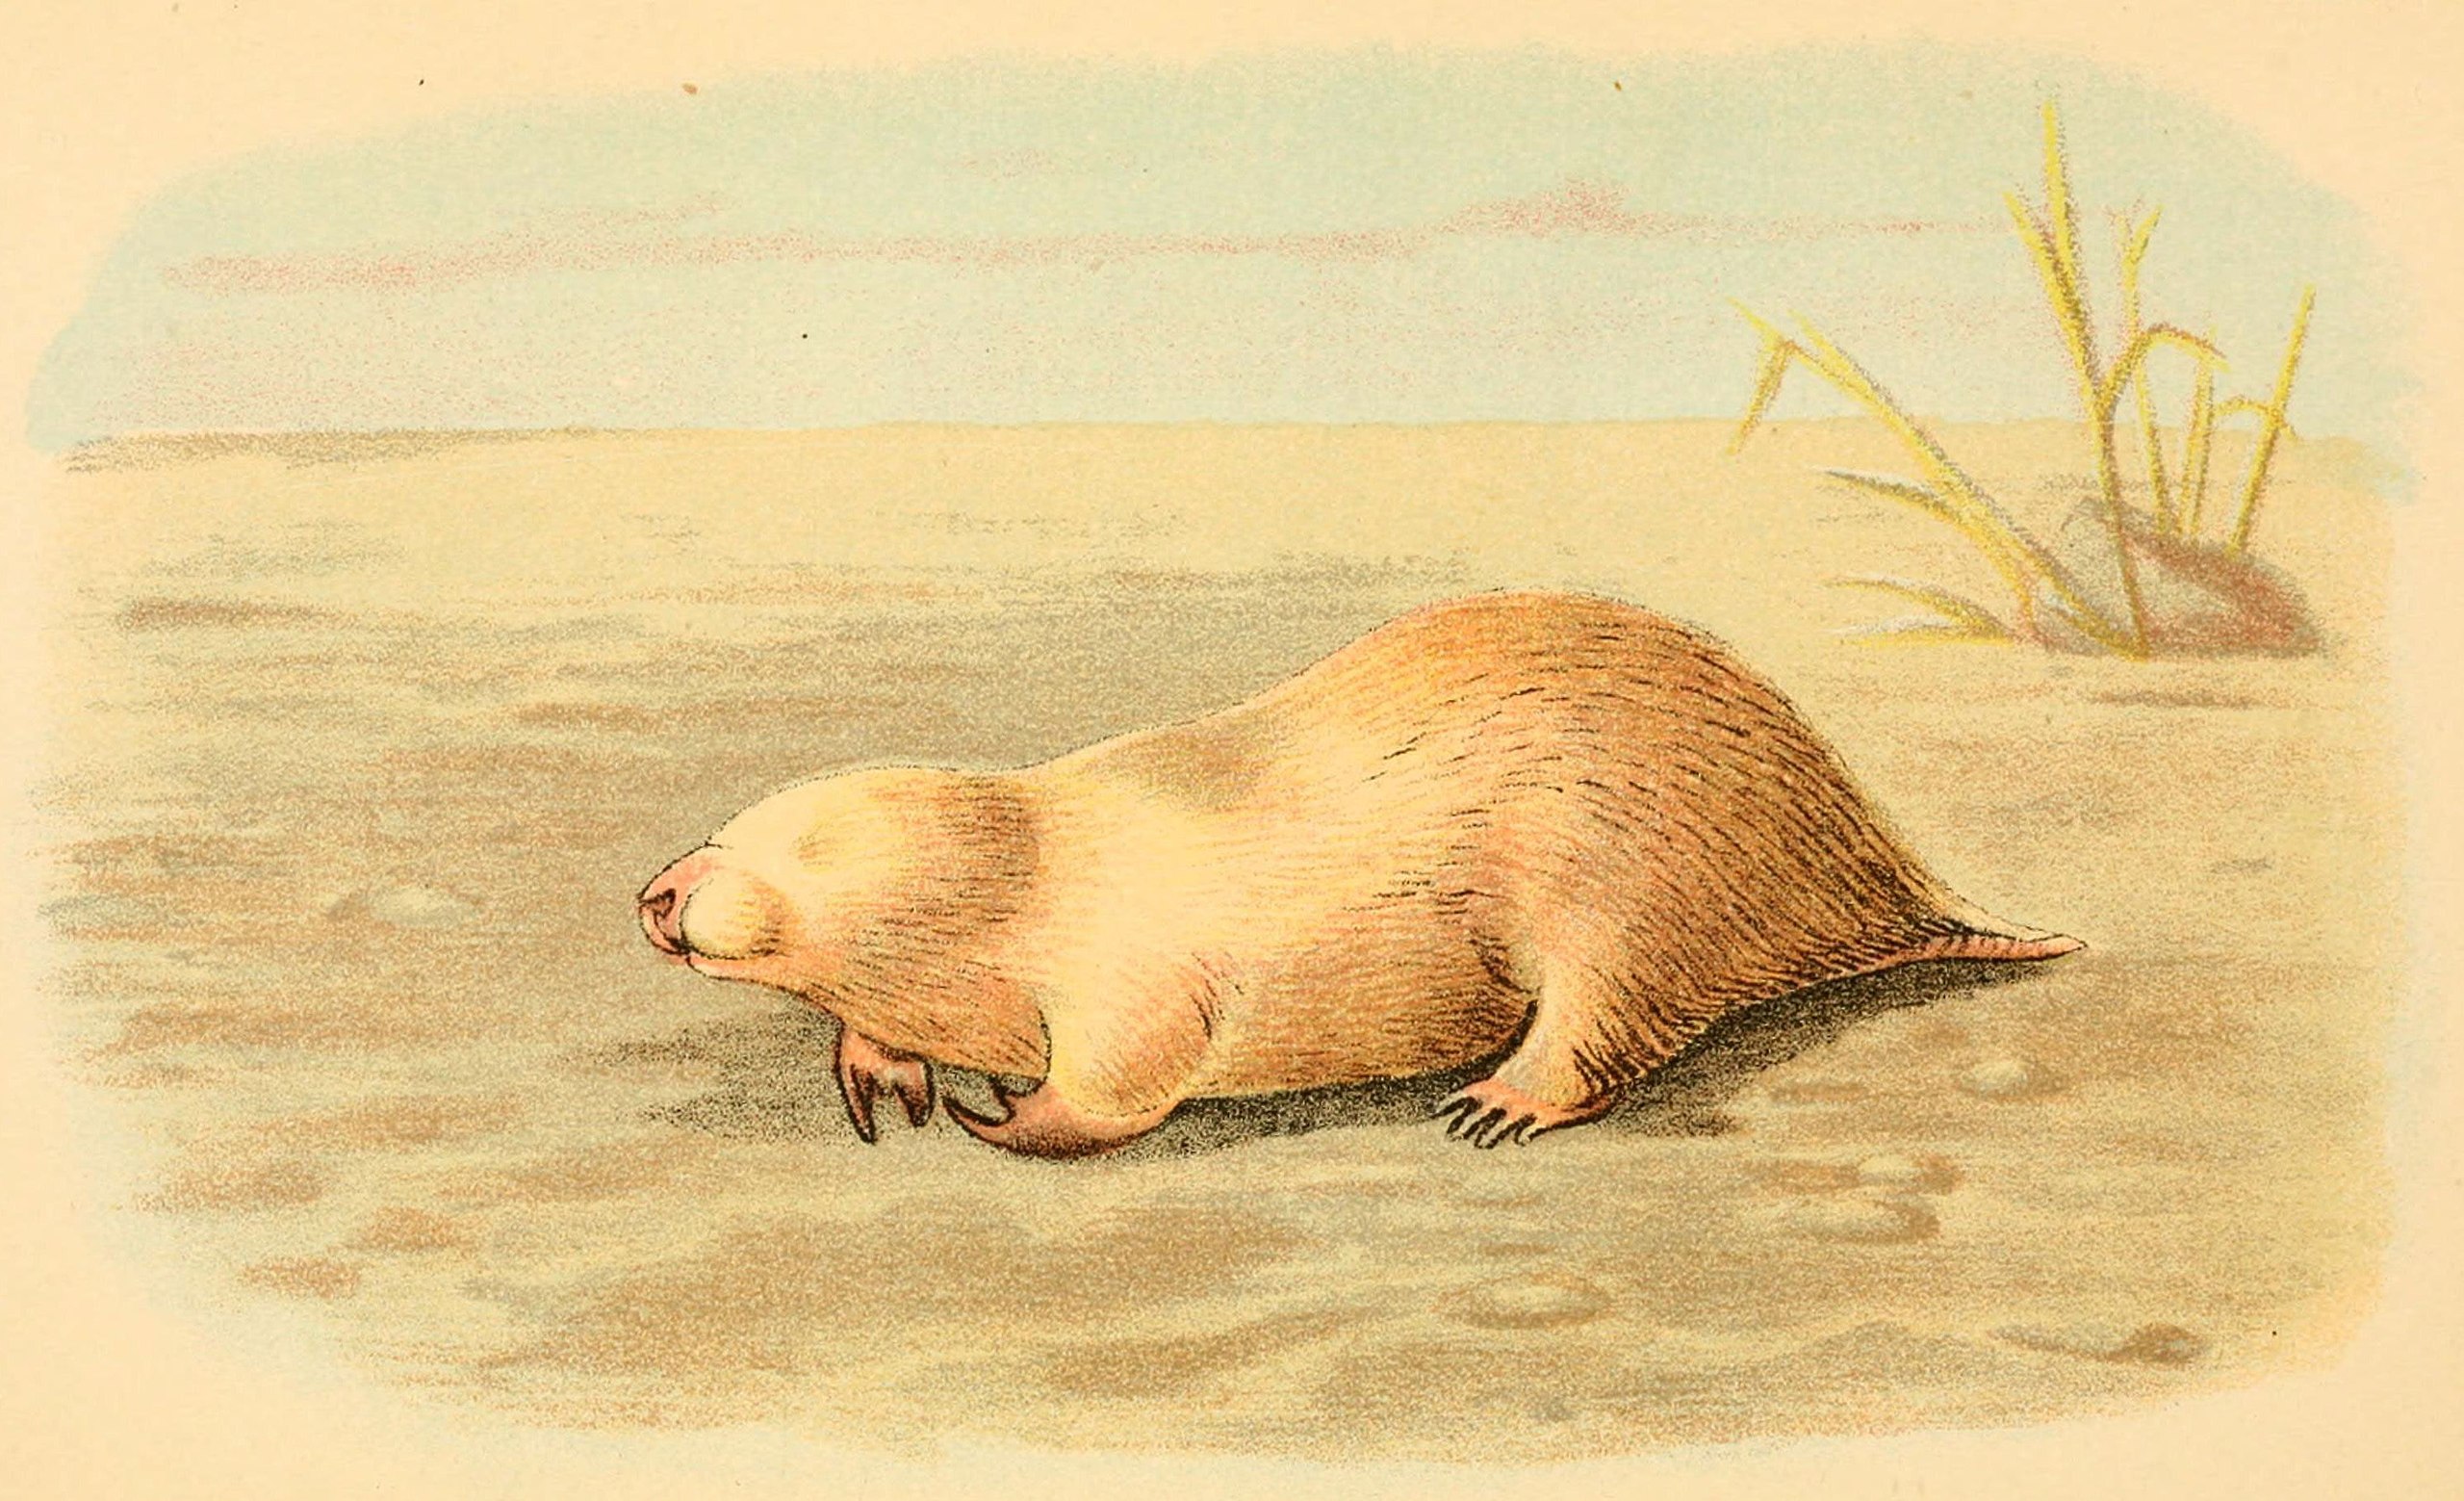 Illustration of a marsupial mole from Australia, which bears a striking resemblance to placental moles.  (Illustration: Richard Lydekker)